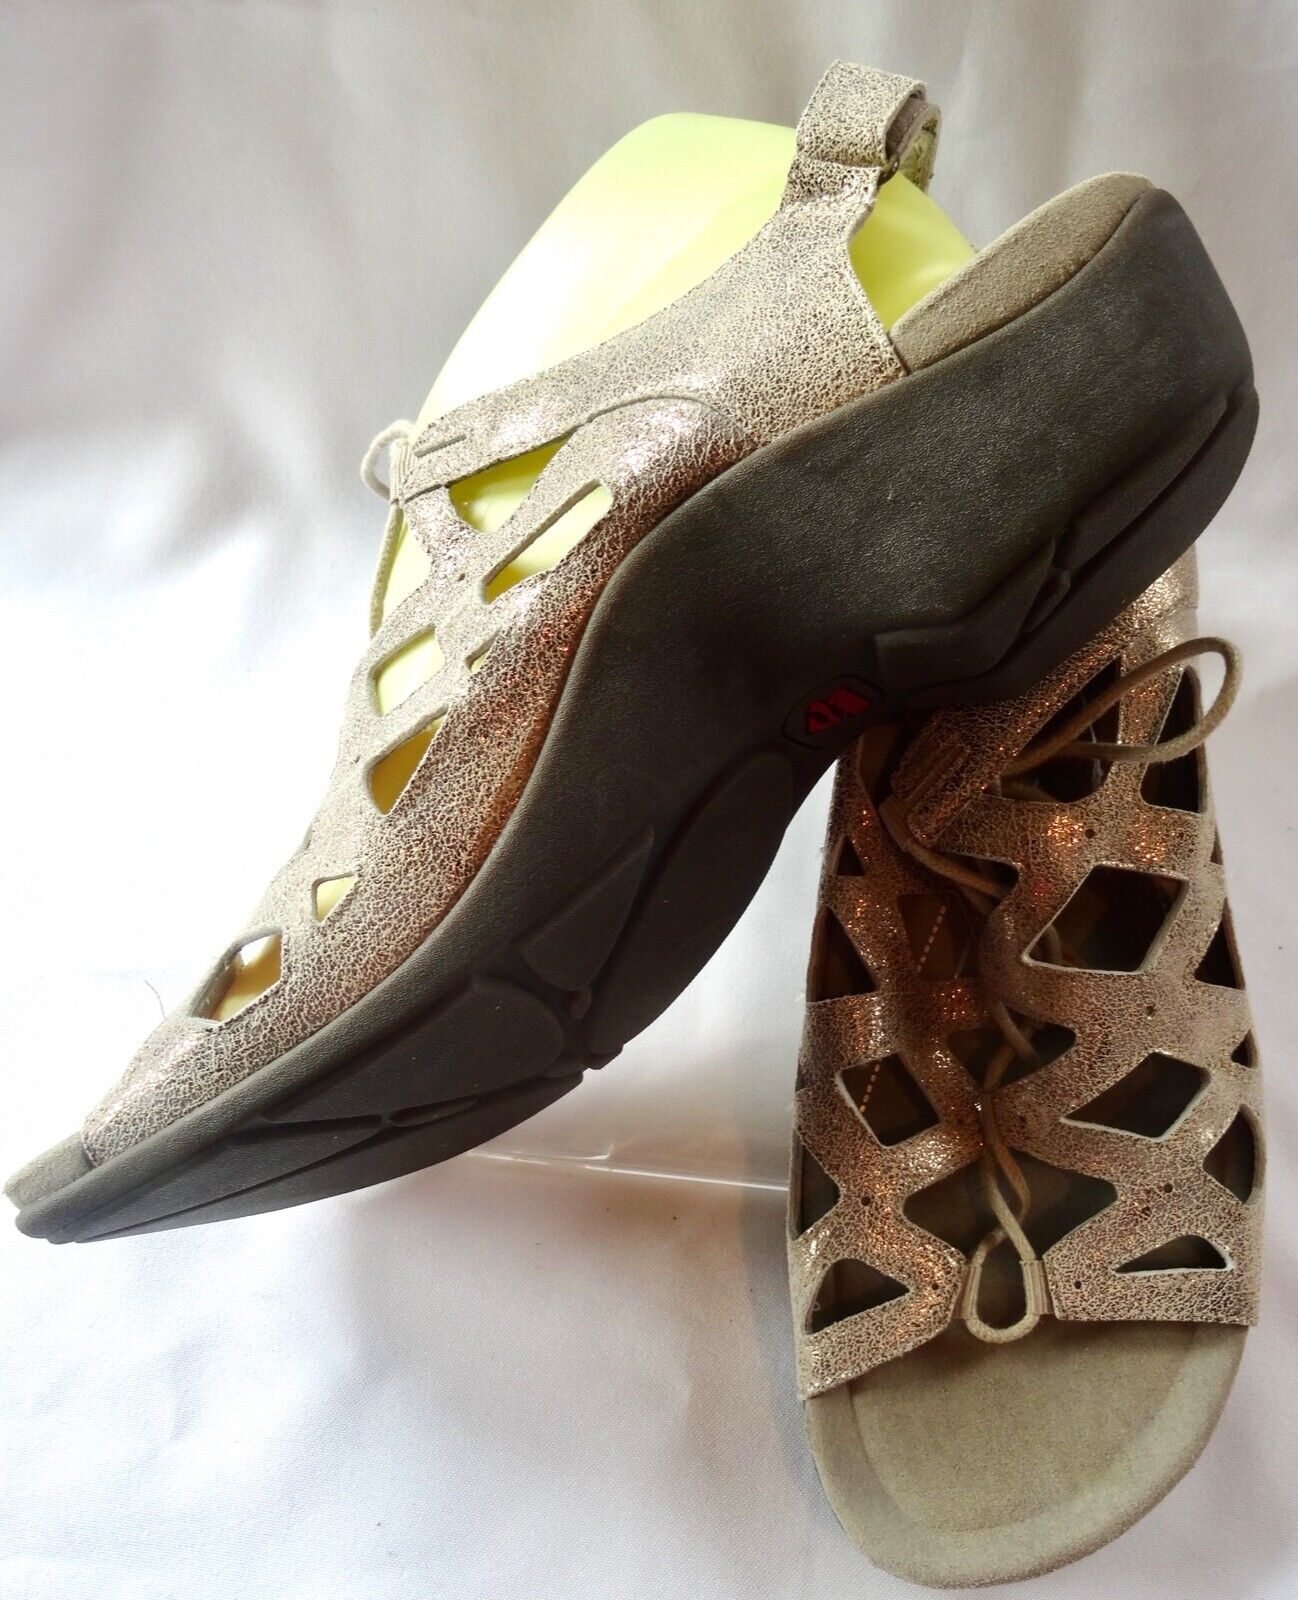 Abeo Gold/Beige Leather Lace Up 1.5" Heel Sandals 10 M eu 42.5 Leather Lined WOW